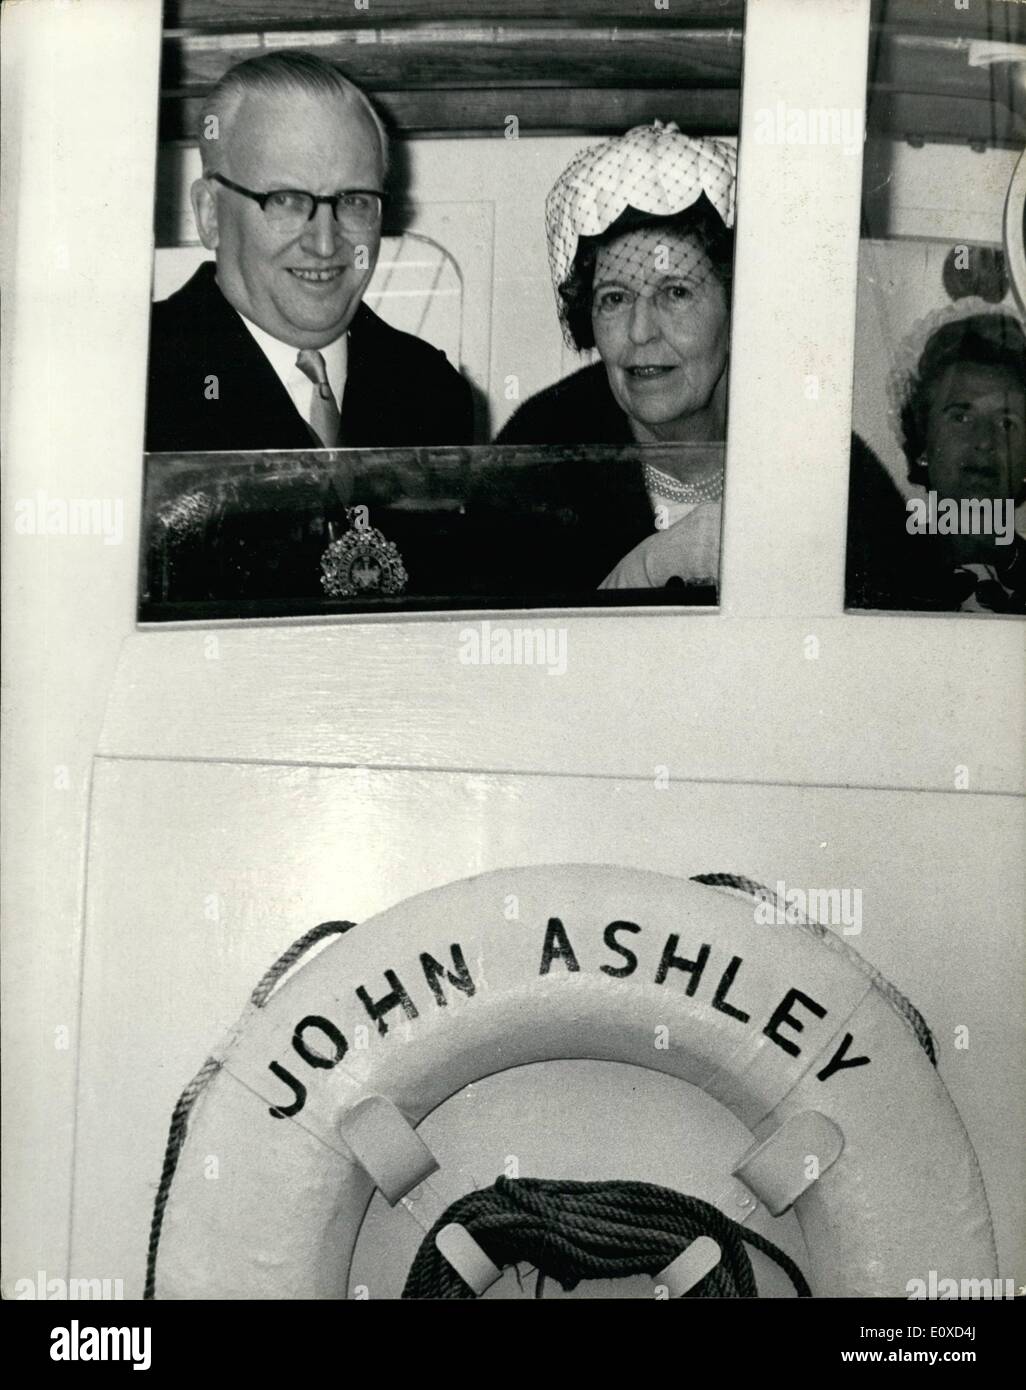 Jun. 06, 1966 - Lord Mayor Visits Floating Church This morning the Lord Mayor, Sir Ralph Perring. paid a visit to the Motor Vessel John Ashley when it means to the Pool of London.The John Ashley is a floating Church and club operated any the ''Flying Angel'' Missions to Seamen, and visits ships moored in the Thames and Medway. Photo Shows The Lord Mayor Sir Ralph Perring and Lady Perring look out from the Wheel house of the John Ashley in the Pool Of London this morning. Stock Photo